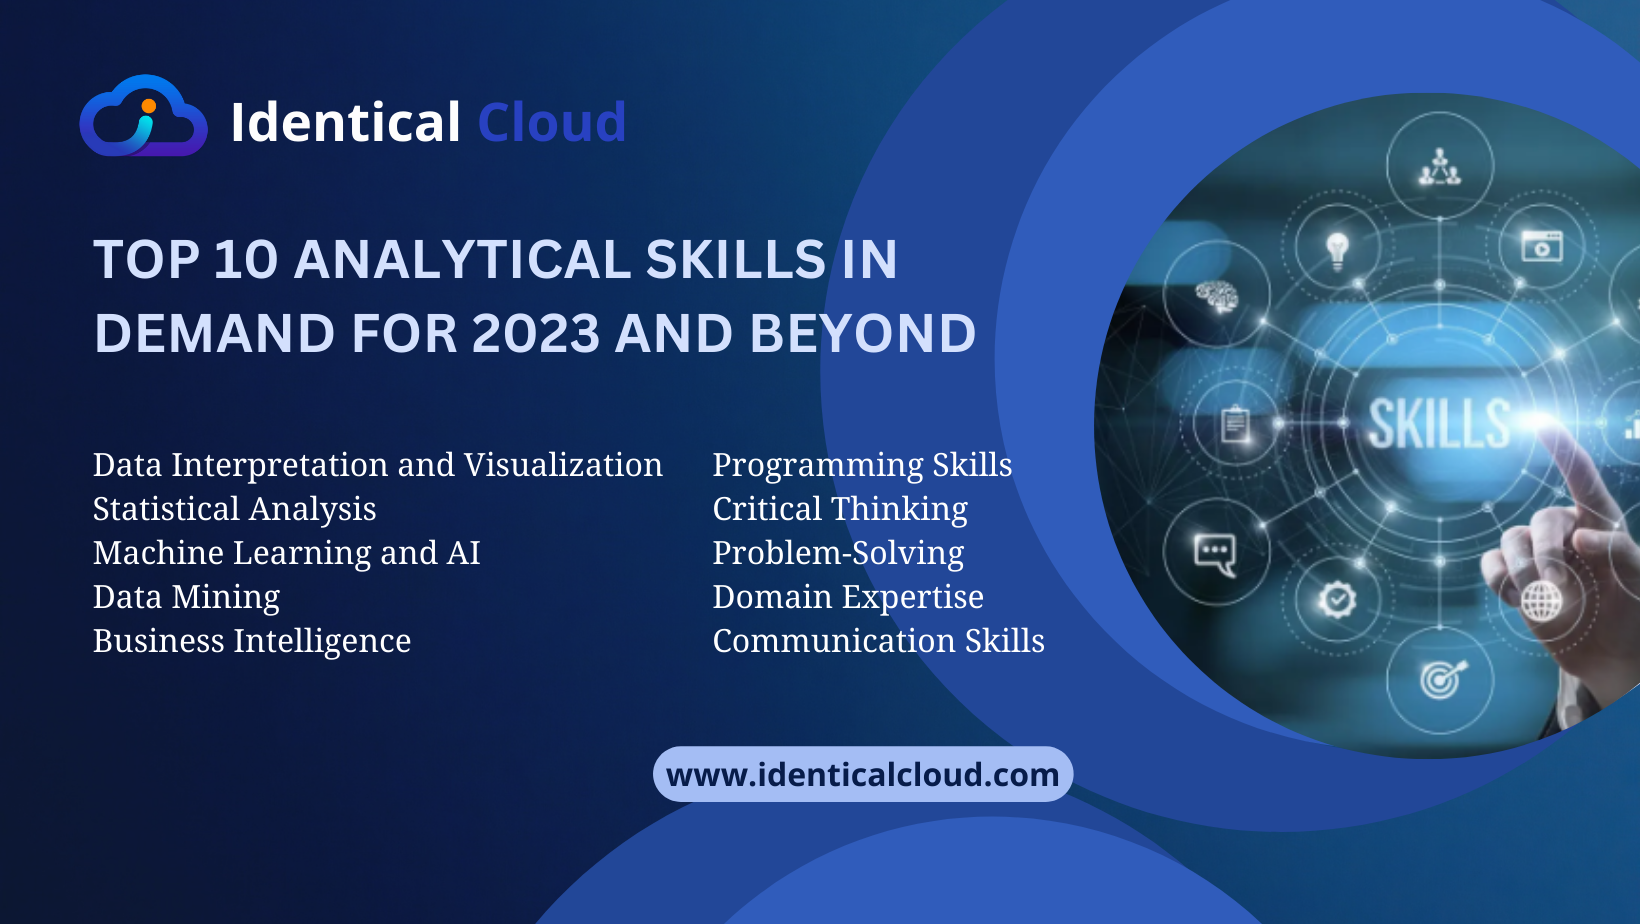 Top 10 Analytical Skills in Demand for 2023 and Beyond - identicalcloud.com